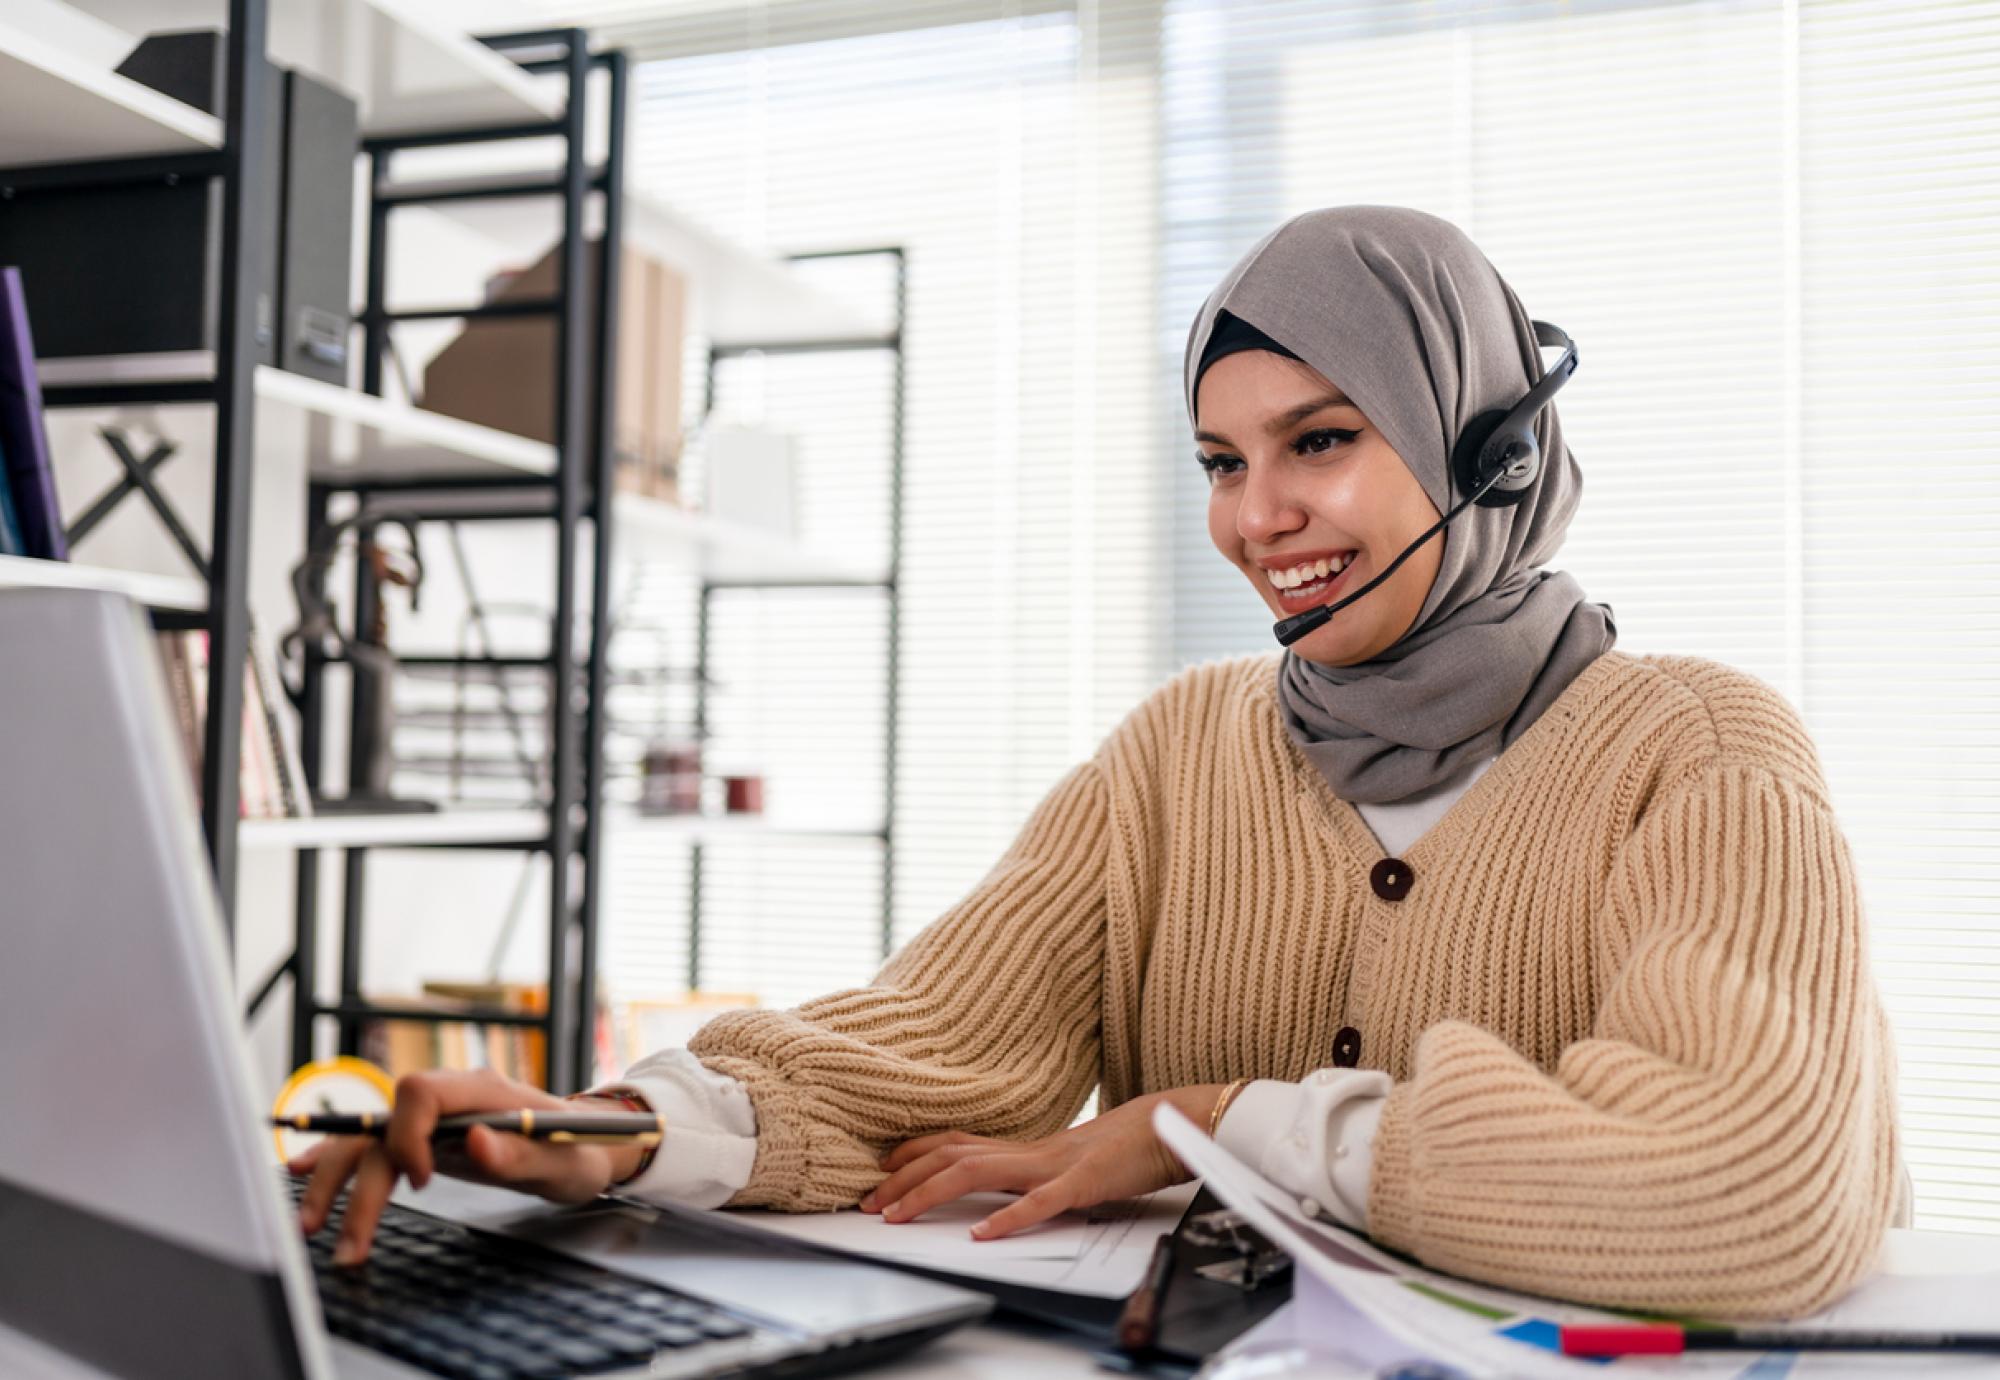 Lady in a hijab working at a computer in an office